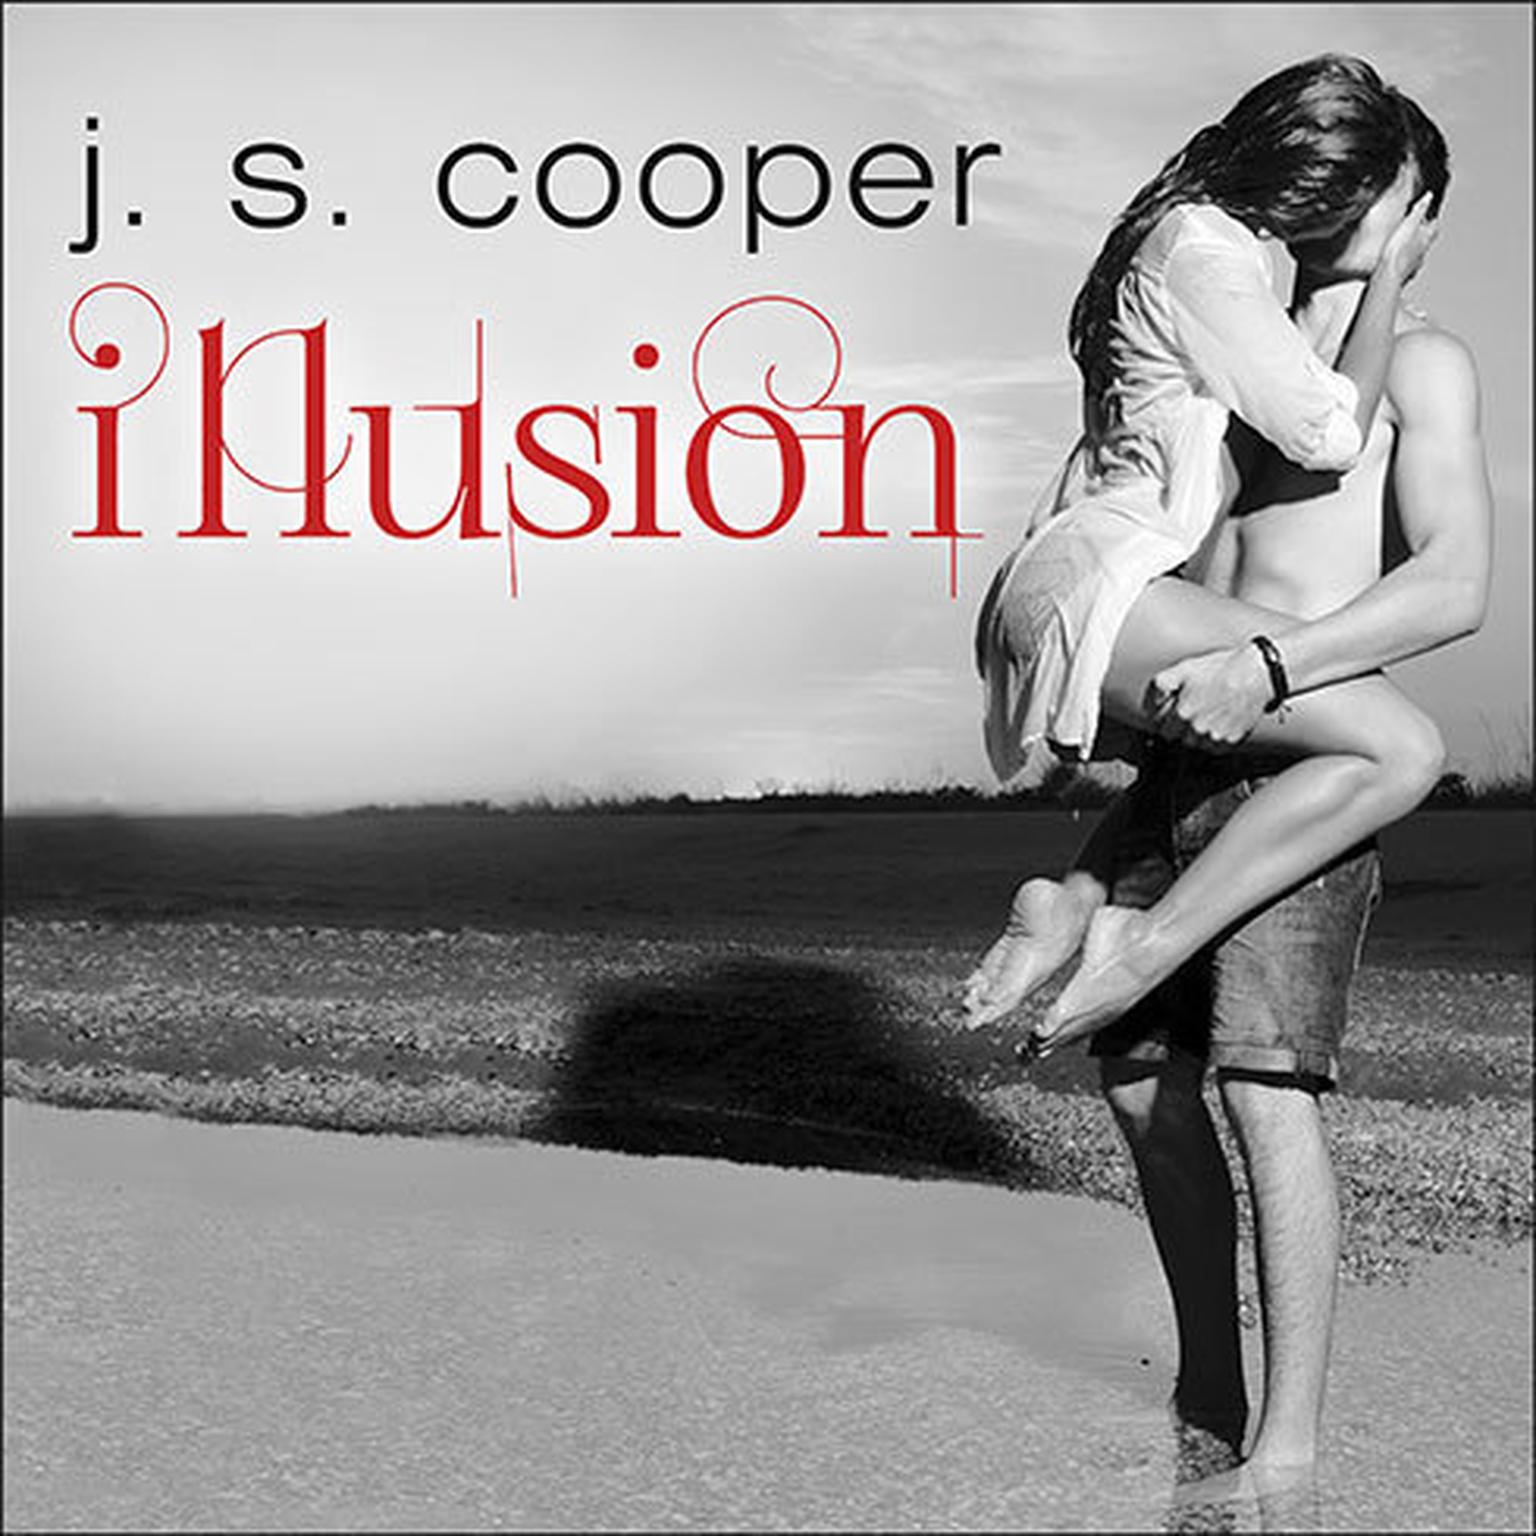 Illusion Audiobook, by J. S. Cooper